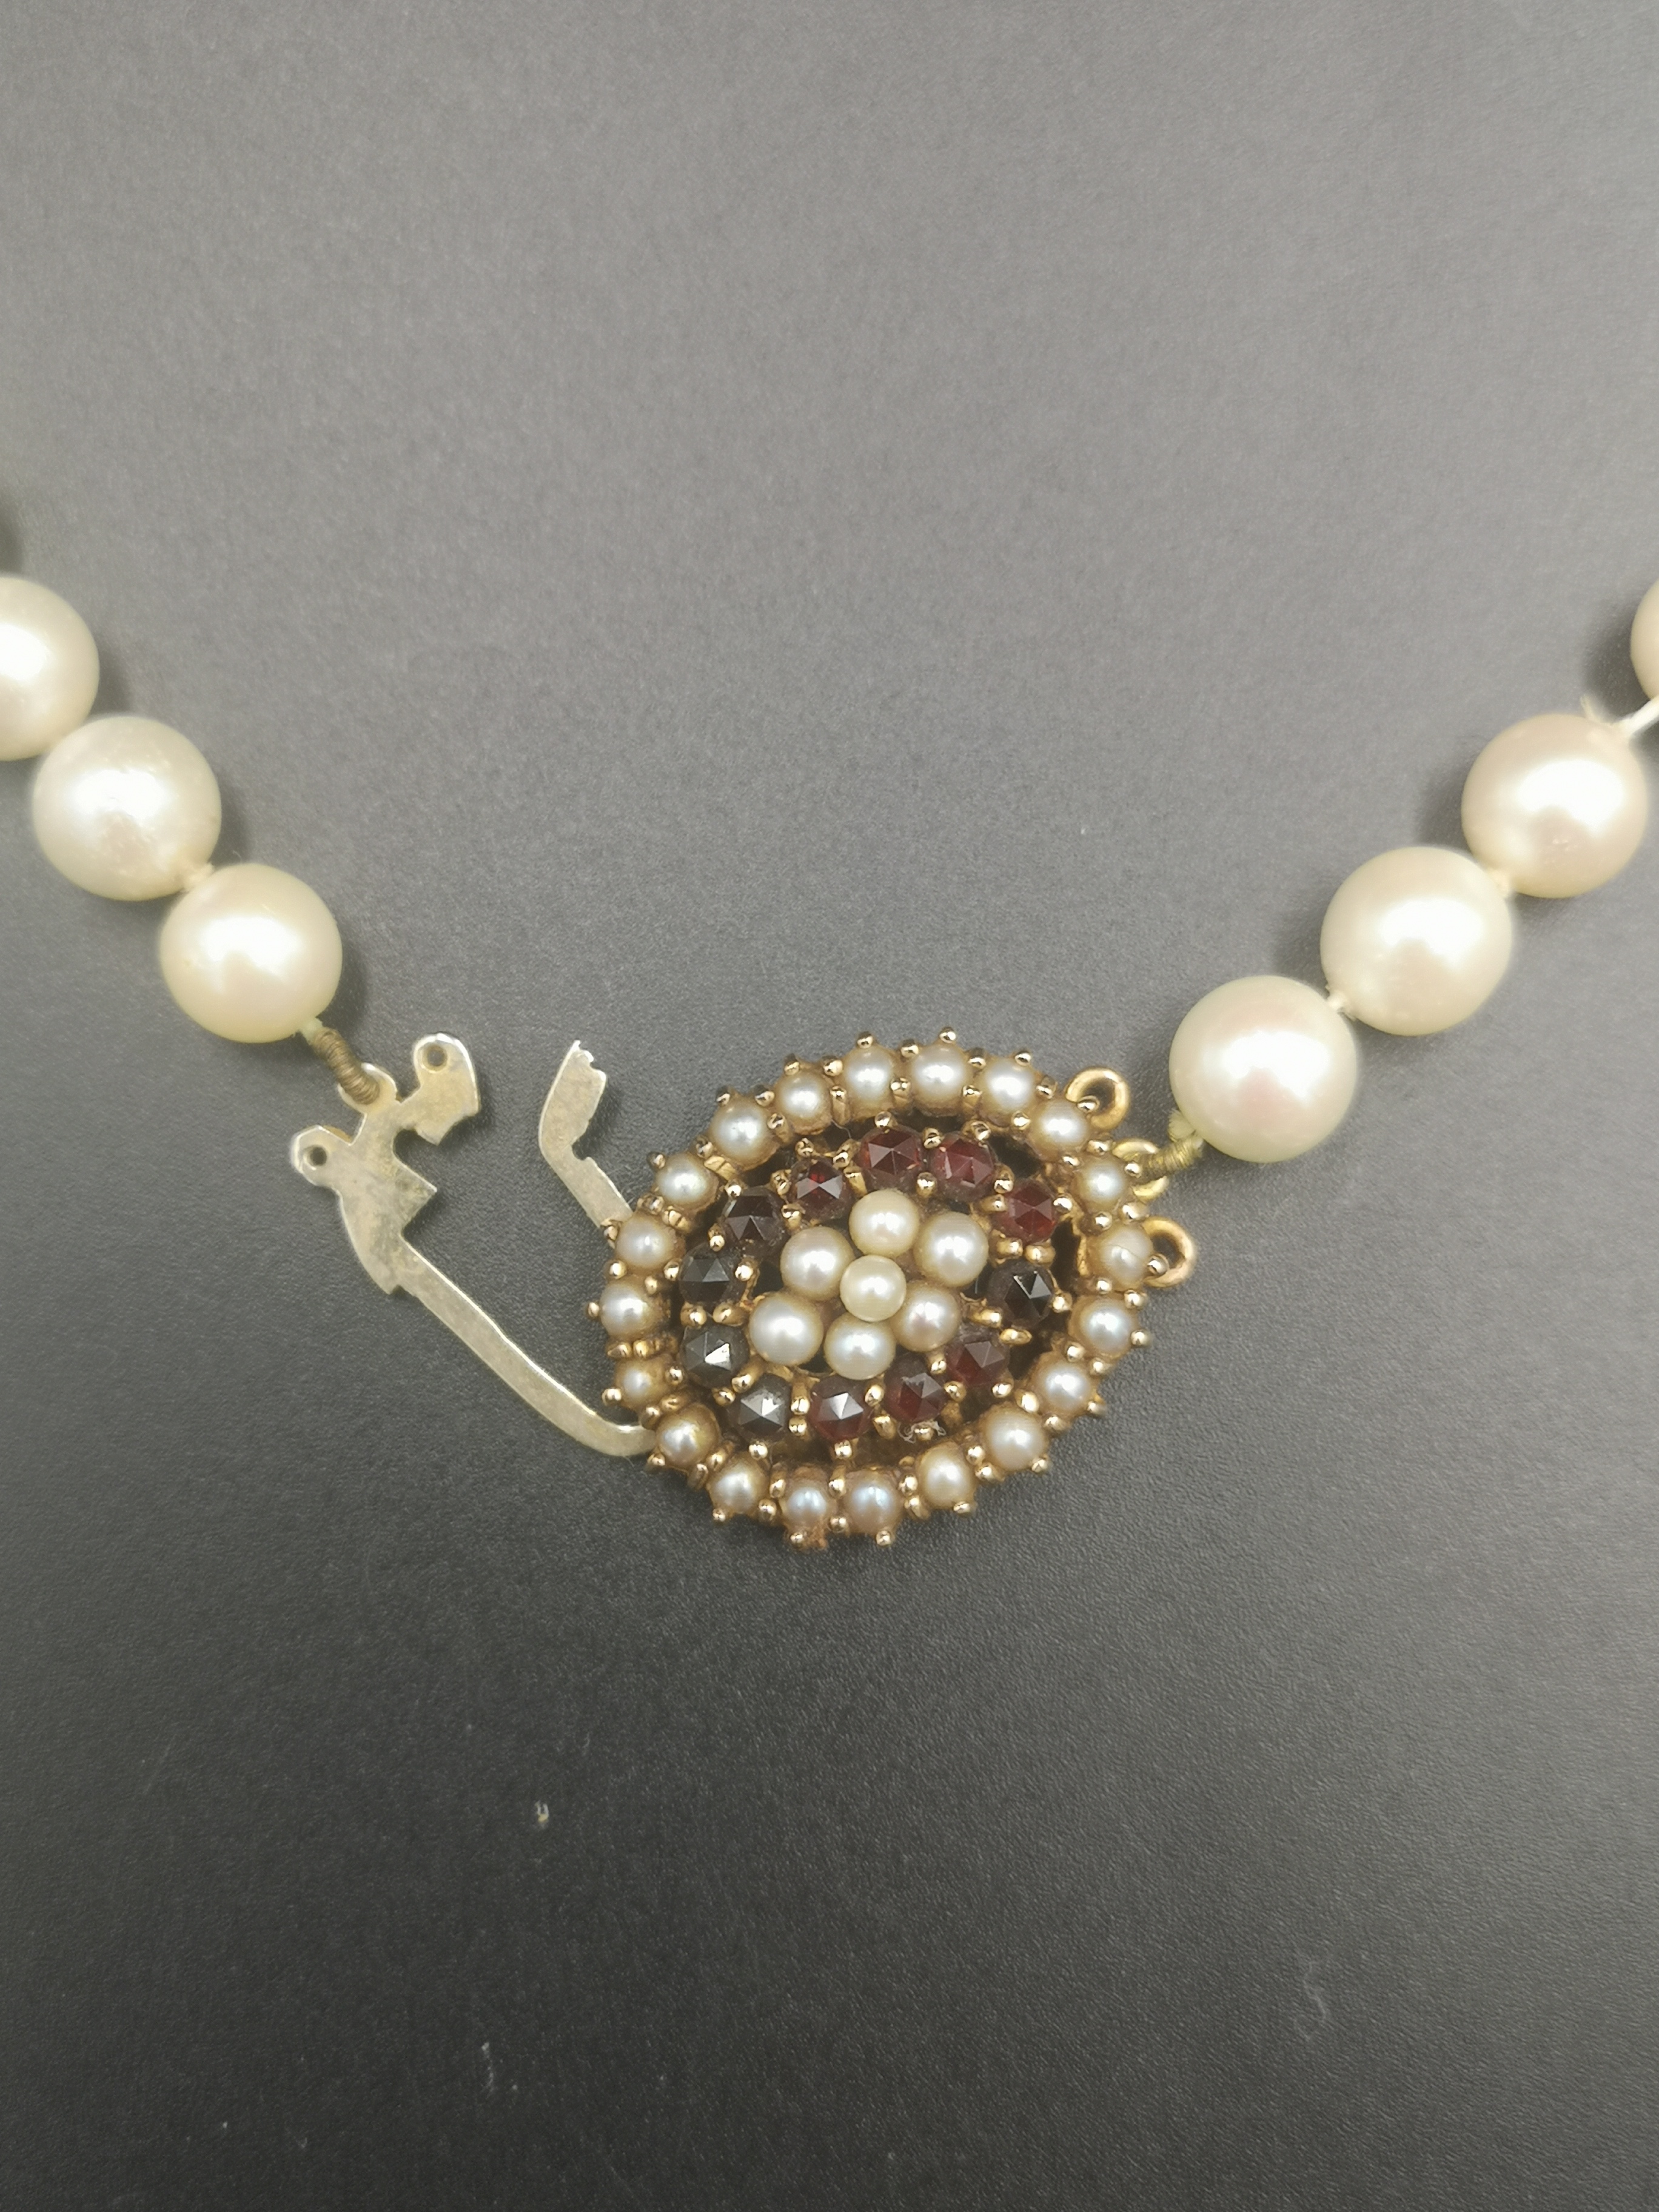 Cameo brooch together with a pearl necklace - Image 3 of 5